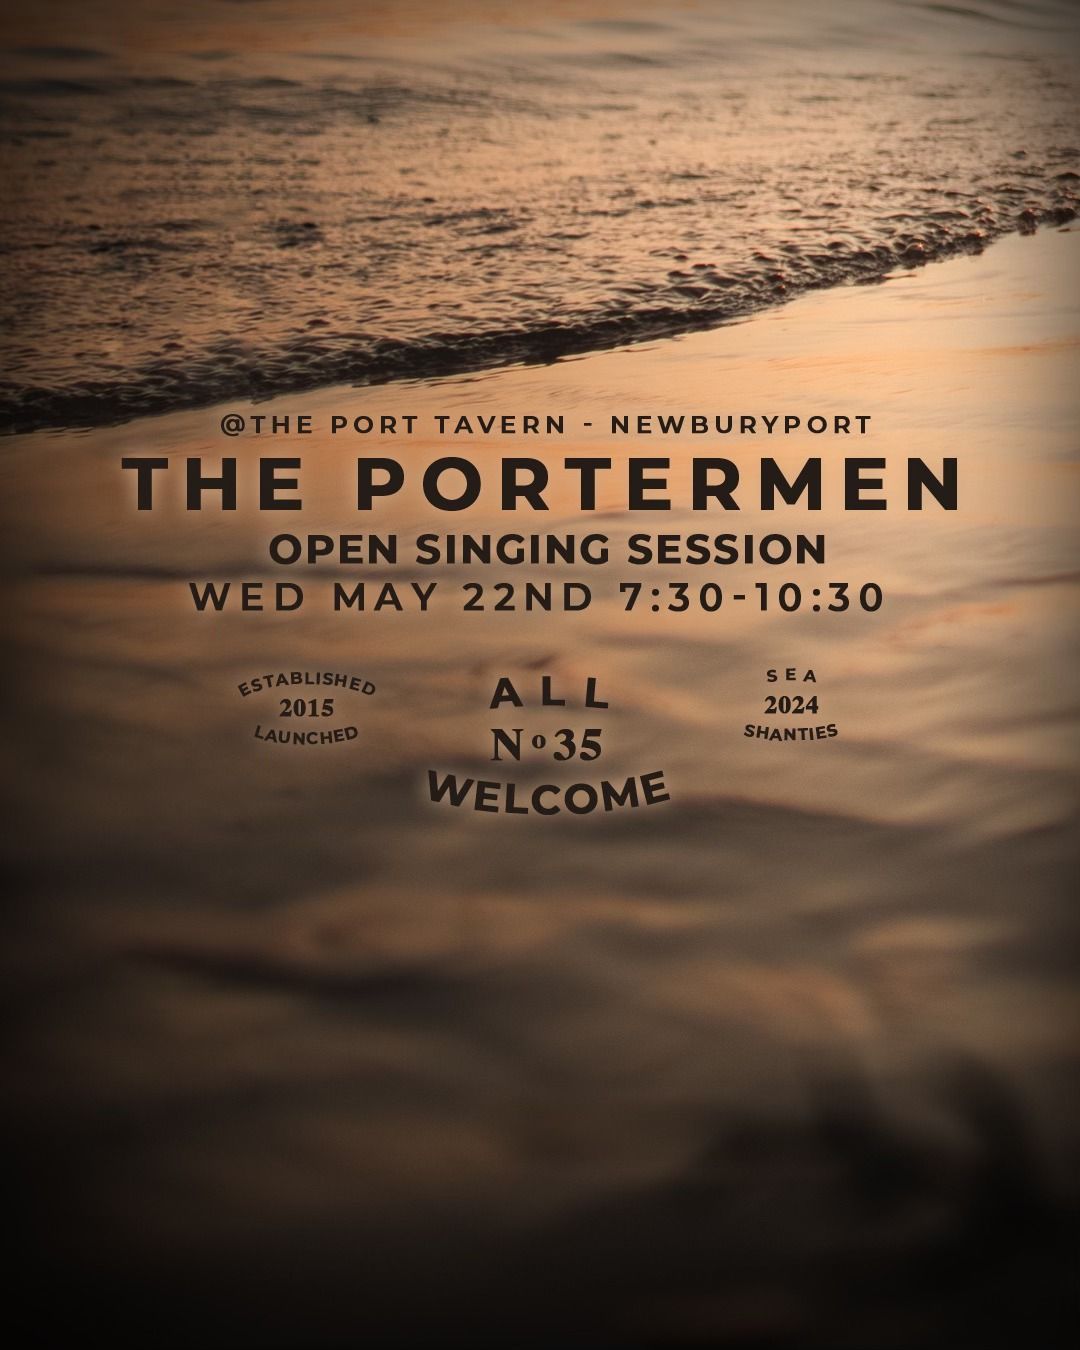 Open Singing Session with The Portermen